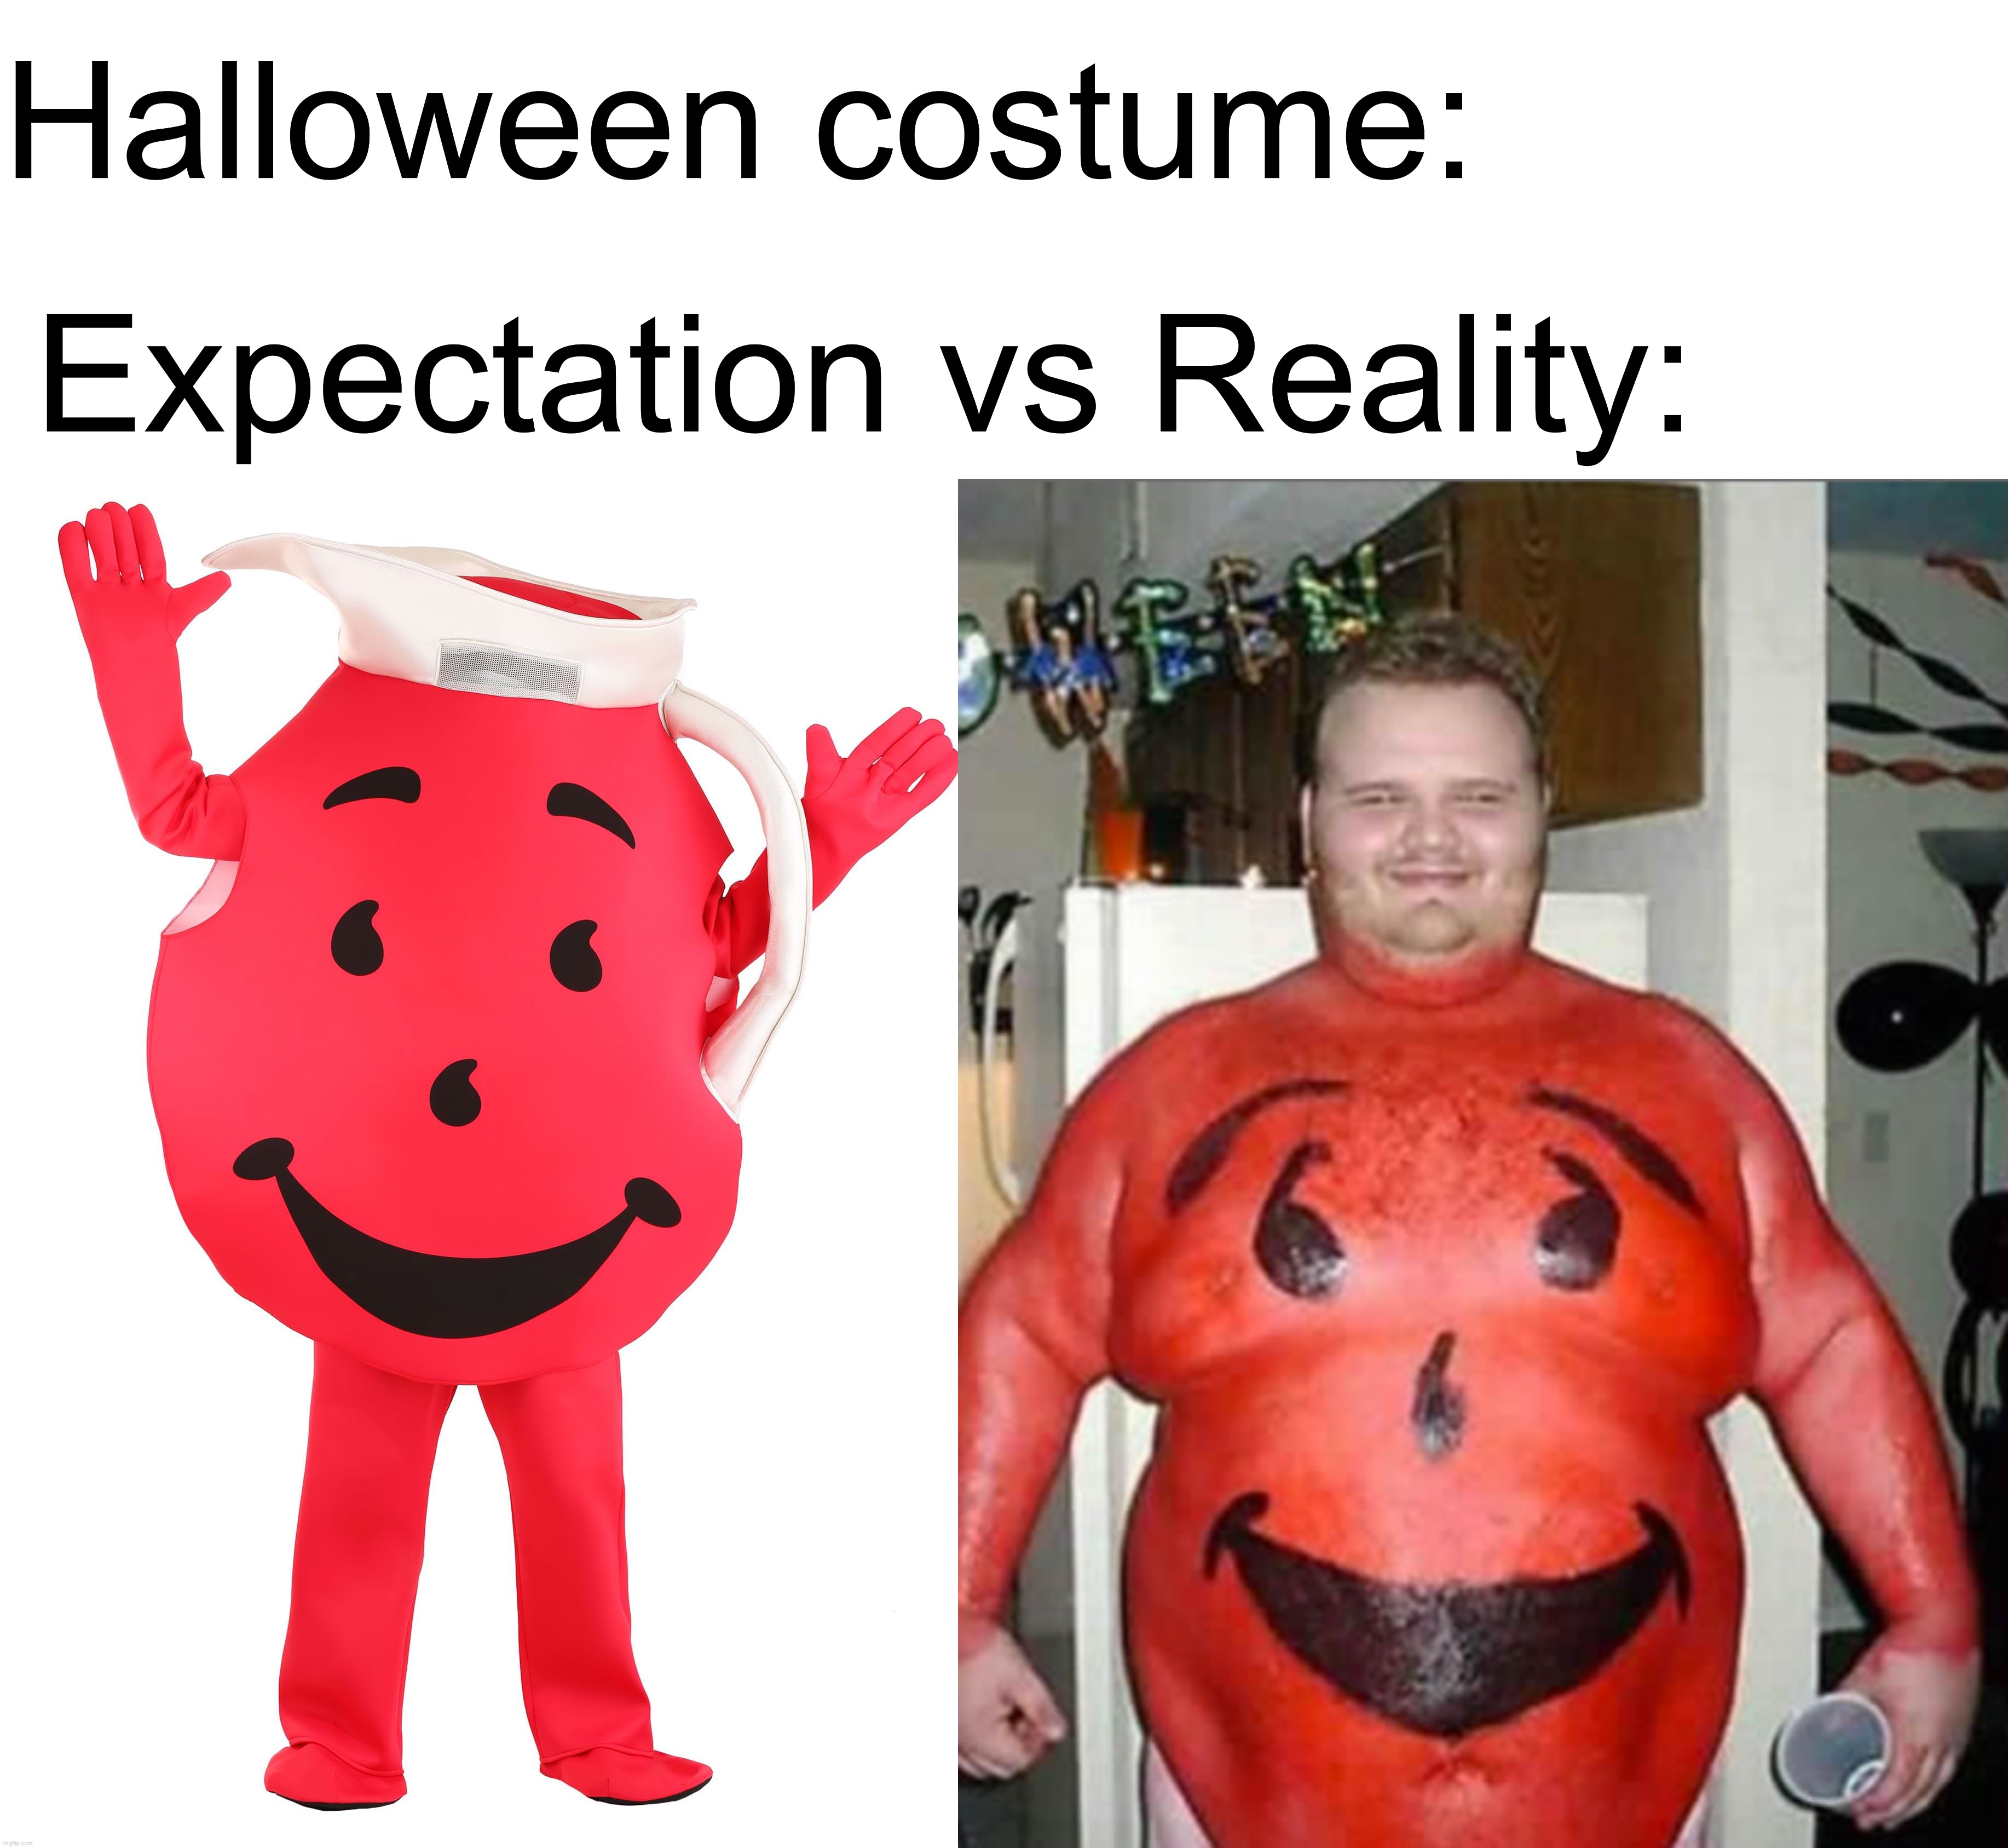 This poor guy… | Halloween costume:; Expectation vs Reality: | image tagged in memes,funny,kool aid man,halloween,spooky month,halloween costume,RedditInReddit | made w/ Imgflip meme maker